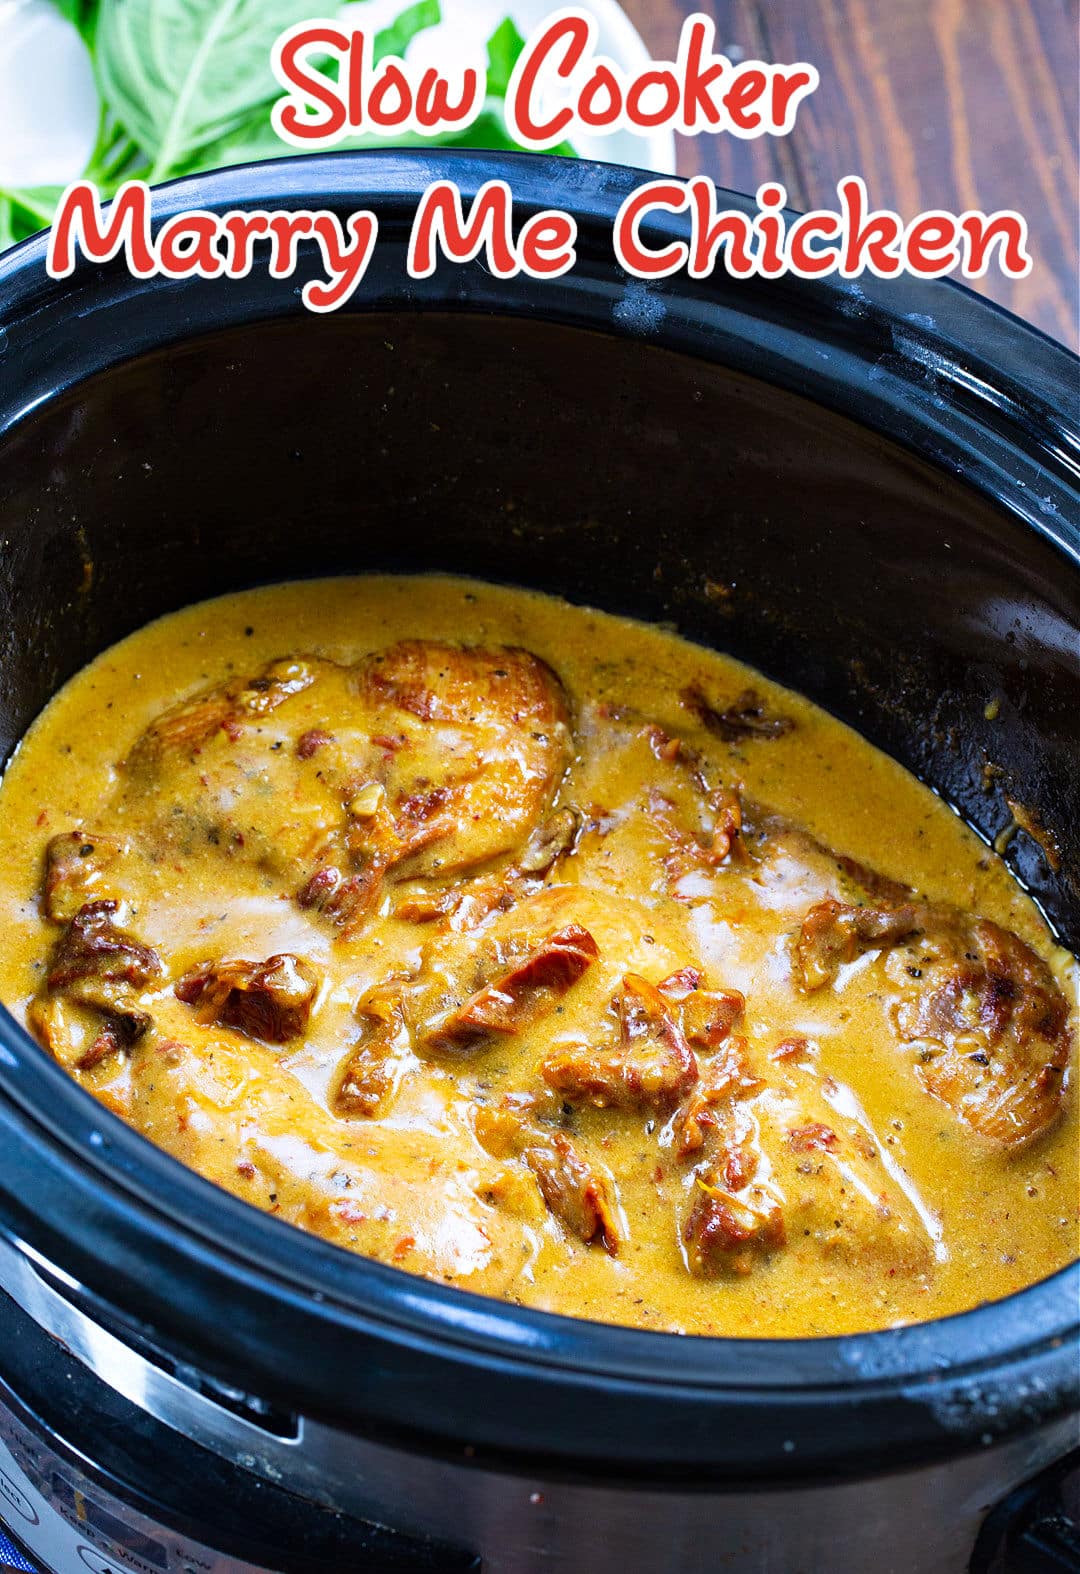  Marry Me Chicken in a slow cooker.